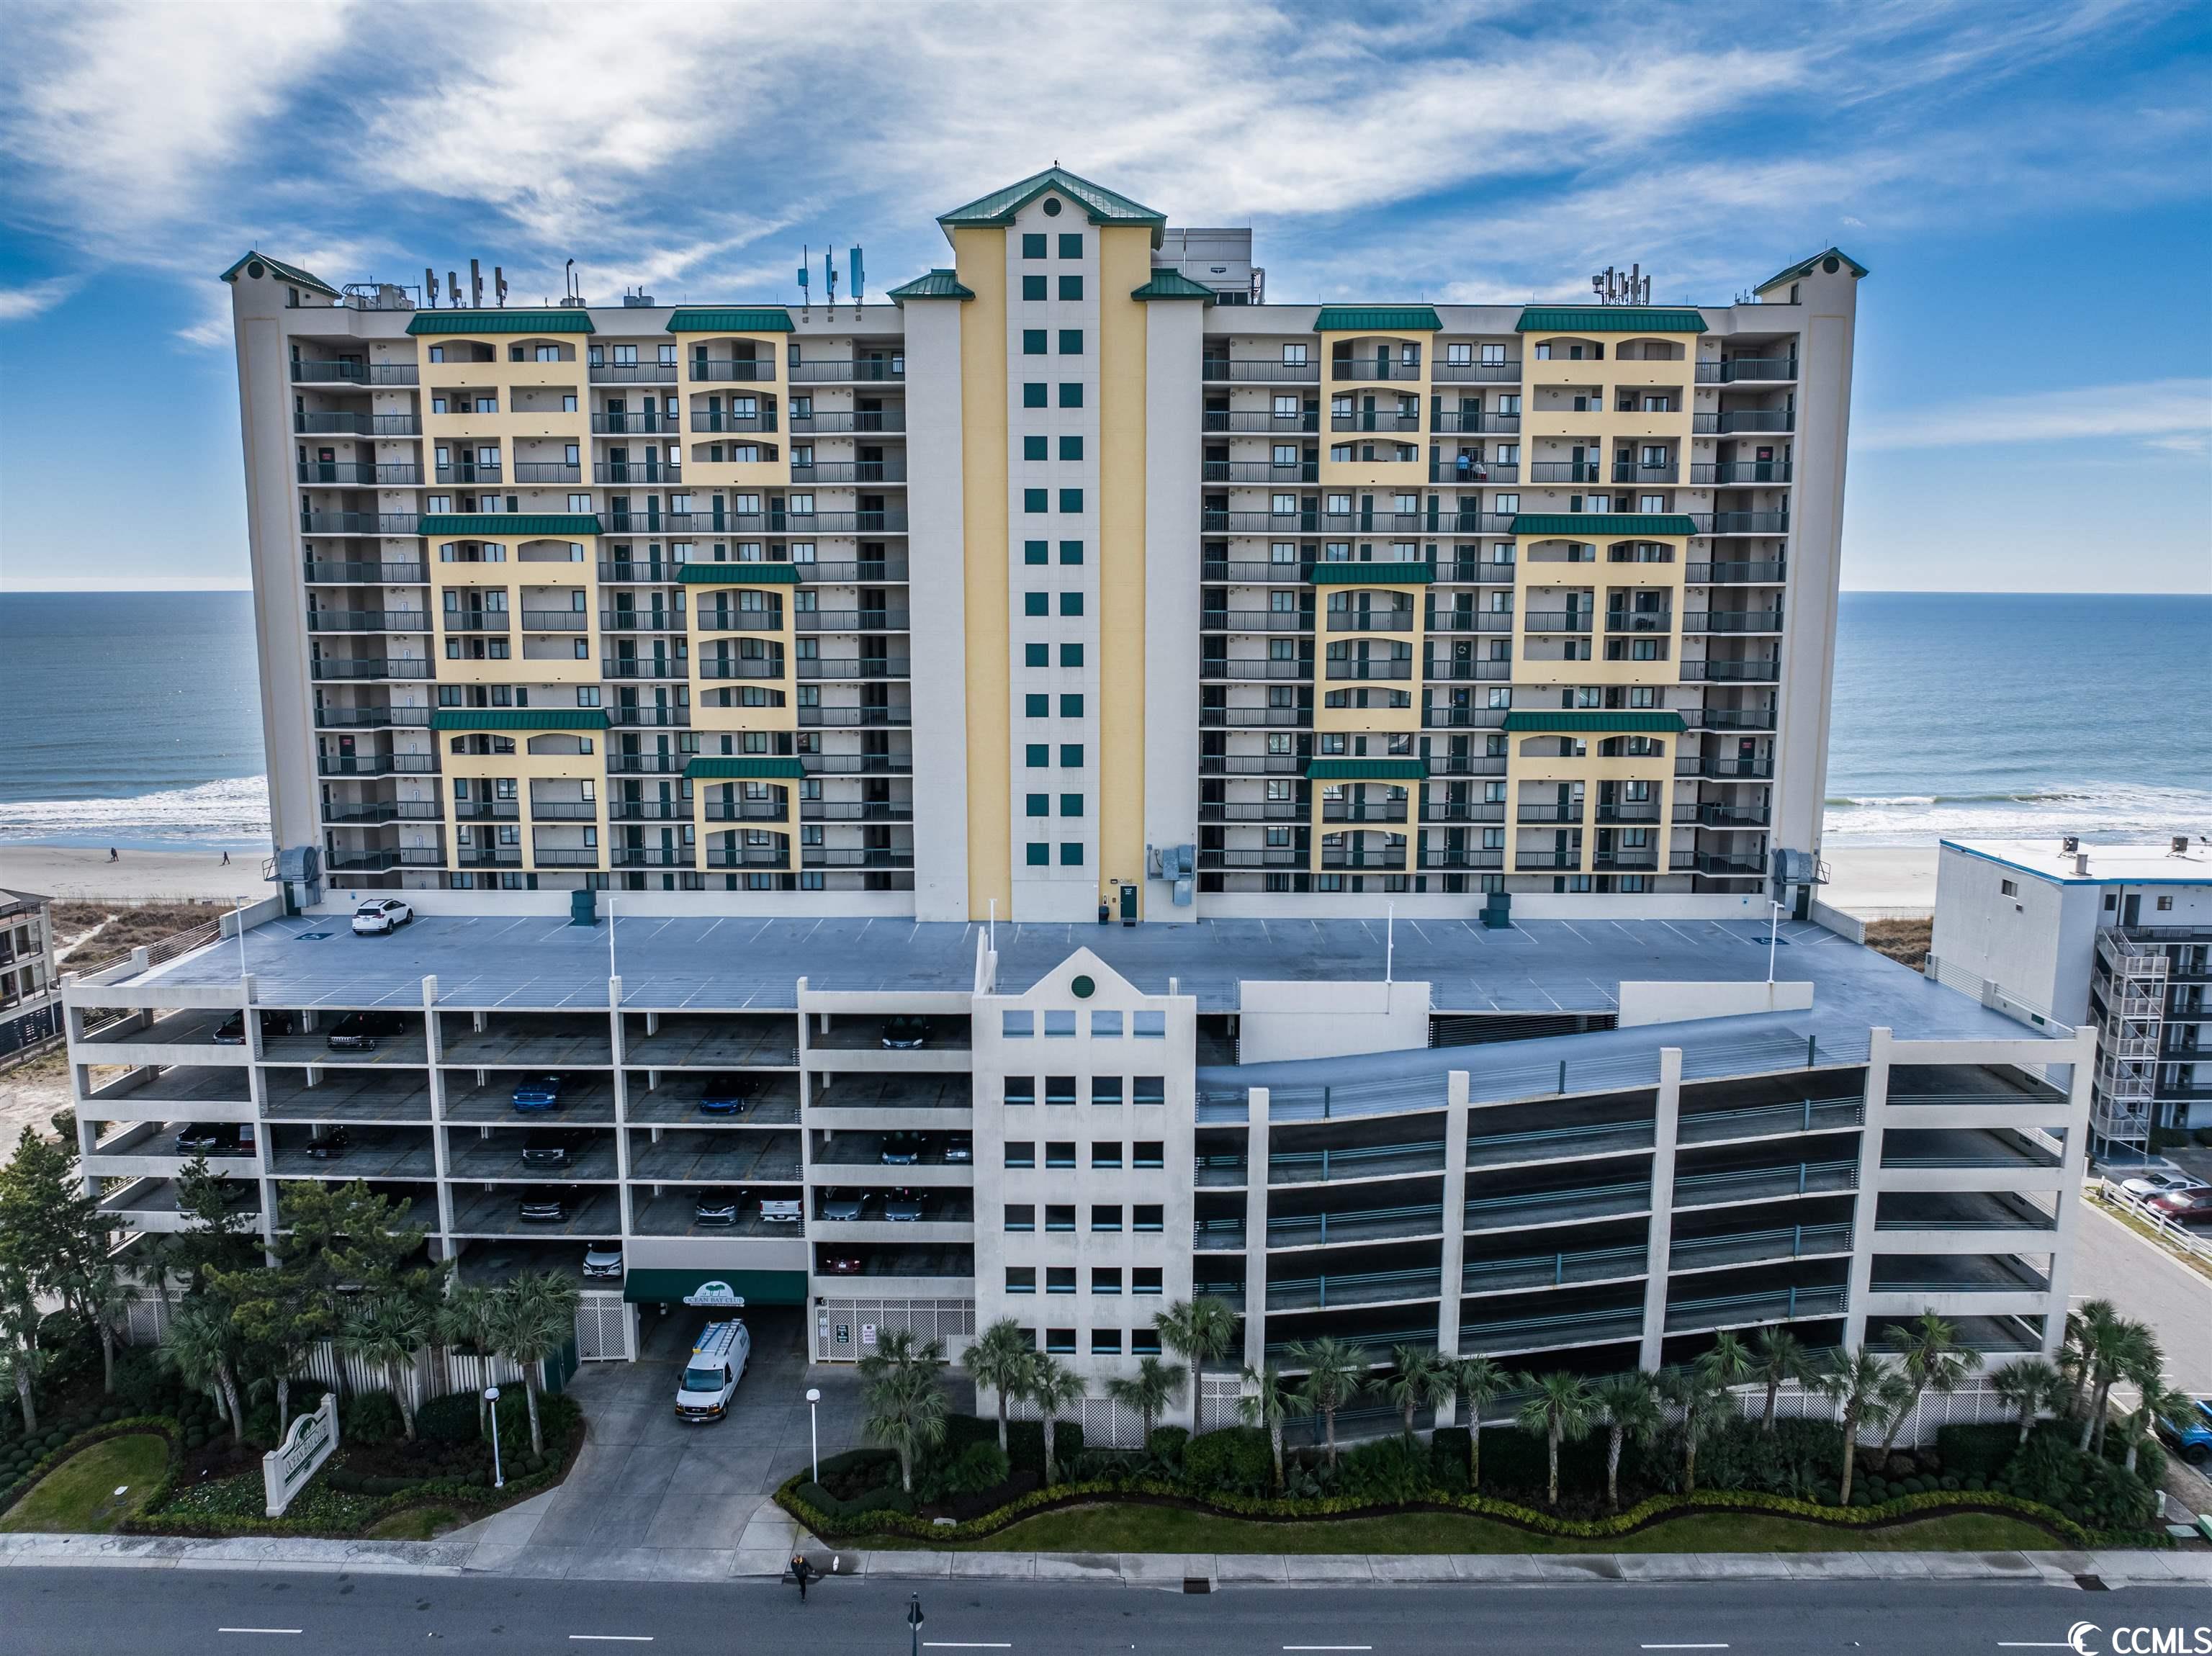 welcome to this luxuriously appointed oceanfront condo in one of the preferred complexes on the beach. located near main street in downtown north myrtle beach, this beautiful condo is offered fully furnished and is move in ready. there are four spacious bedrooms featuring a king bedroom suite in master and three queen sized beds in the others. there are three bathrooms; one adjacent to the master that comes with a jacuzzi and walk in shower, one with the second bedroom and one is shared with the other two bedrooms. to make it more comfortable there are ceiling fans in all rooms.   a real plus is the tile flooring throughout this 1737 sf unit, which helps with sandy accumulations after a long day on the beach. and what else is needed...a full sized washer and dryer to help with the wet clothes and towels you bring from the shore. another feature that will capture your attention is the tasteful artwork throughout. the glass top table and six chairs look as though they've never been used. the living area has a supple brown leather sleeper sofa with matching loveseat and chair with an ottoman as well as a  navy blue leather glider rocker with ottoman and big screen tv. on the balcony there are two new adirondack chairs that beckon you to sit and watch the sun rise or enjoy a cold beverage as the sun sets. by the way, this 12th floor unit comes with panoramic ocean views.  in addition, there is an outside storage closet next to the front door. don't hesitate to move on this one, it won't be available long. call with questions.